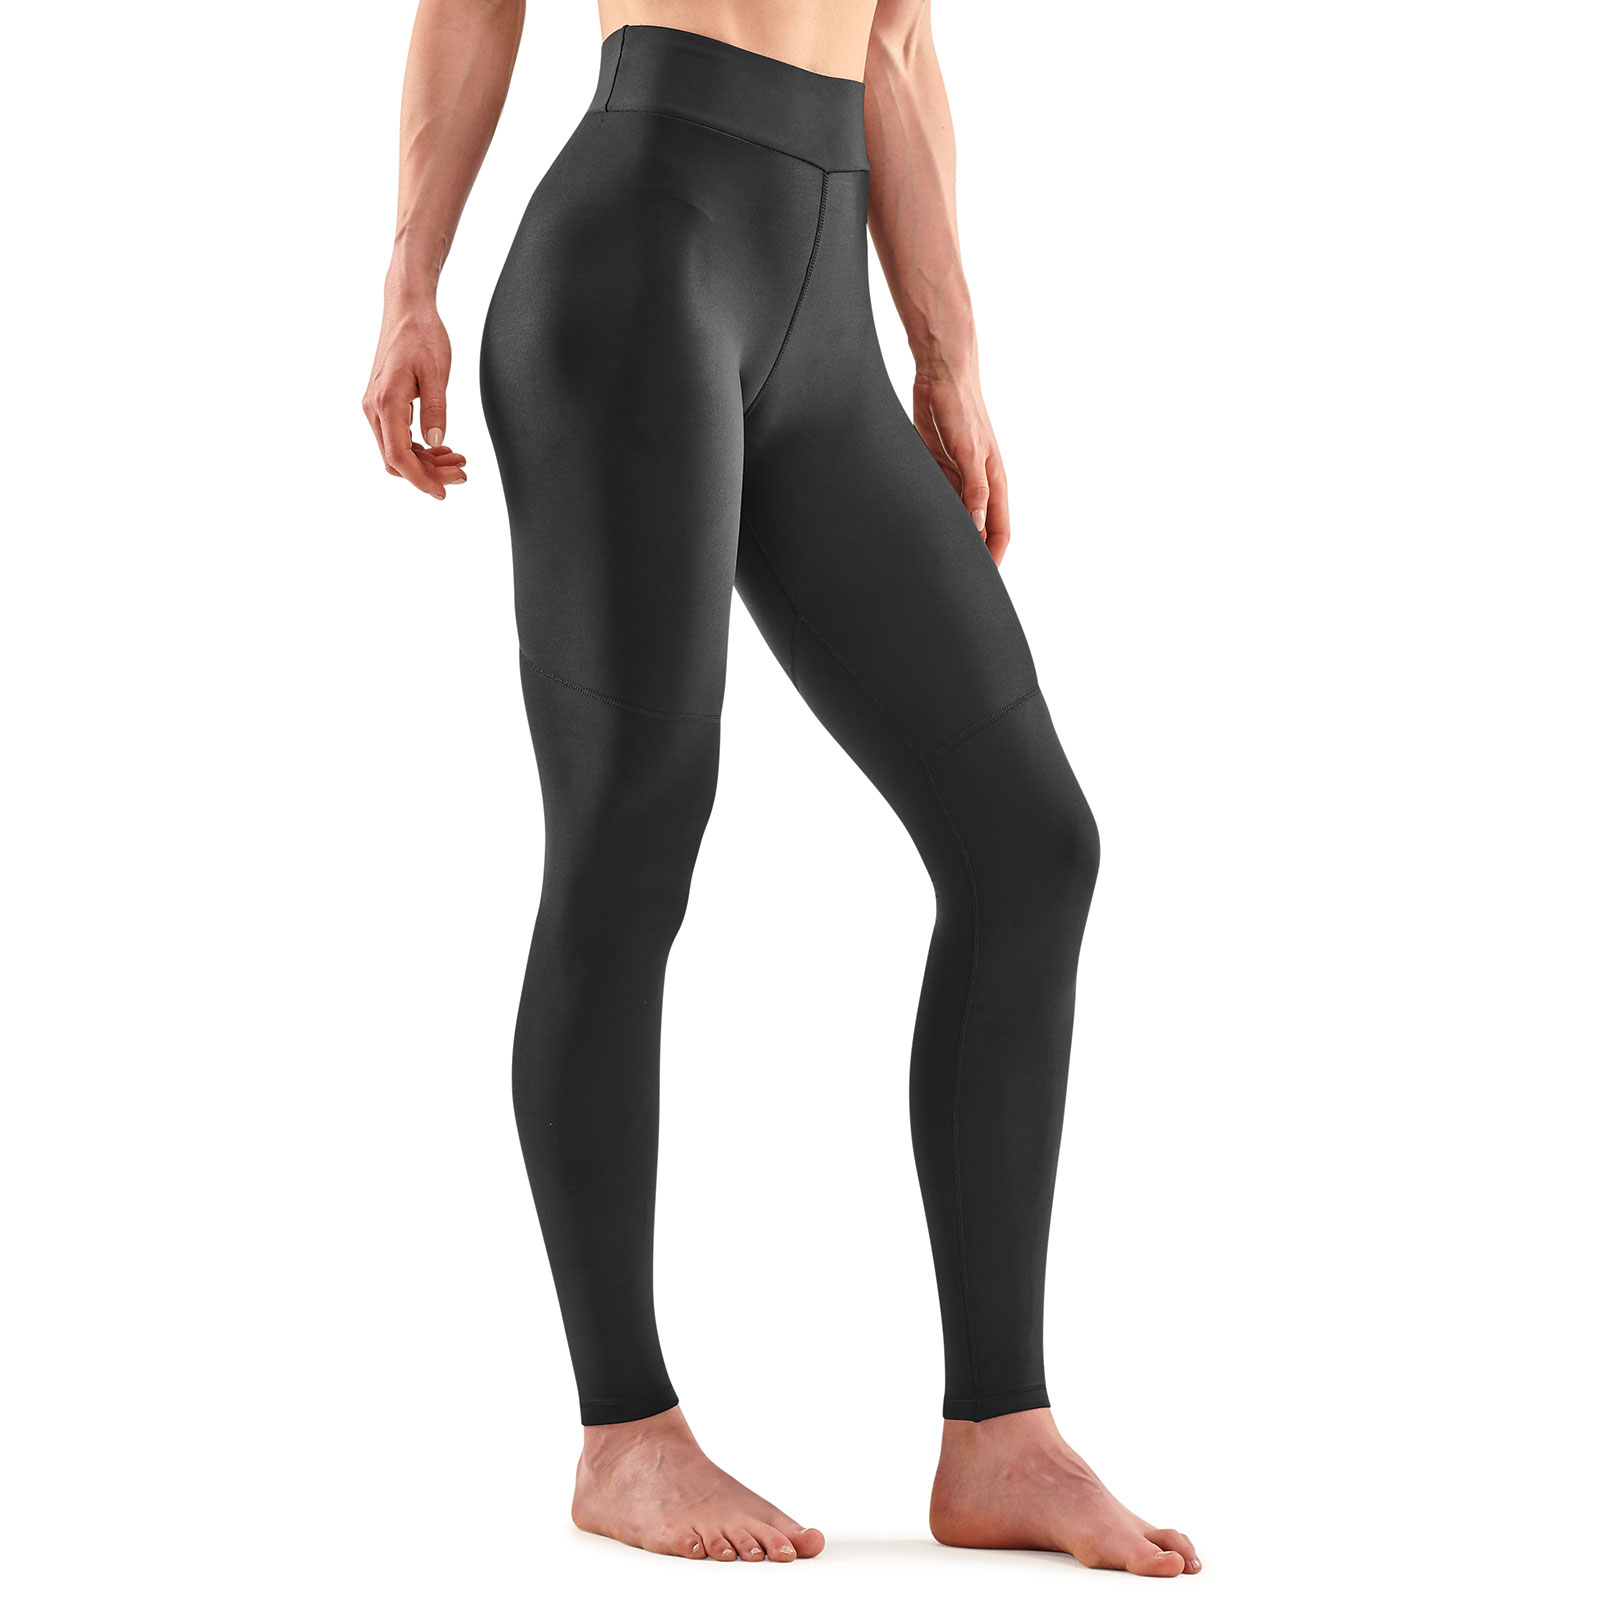 SKINS SERIES-3 WOMEN'S THERMAL LONG TIGHTS AMETHYST - SKINS Compression USA